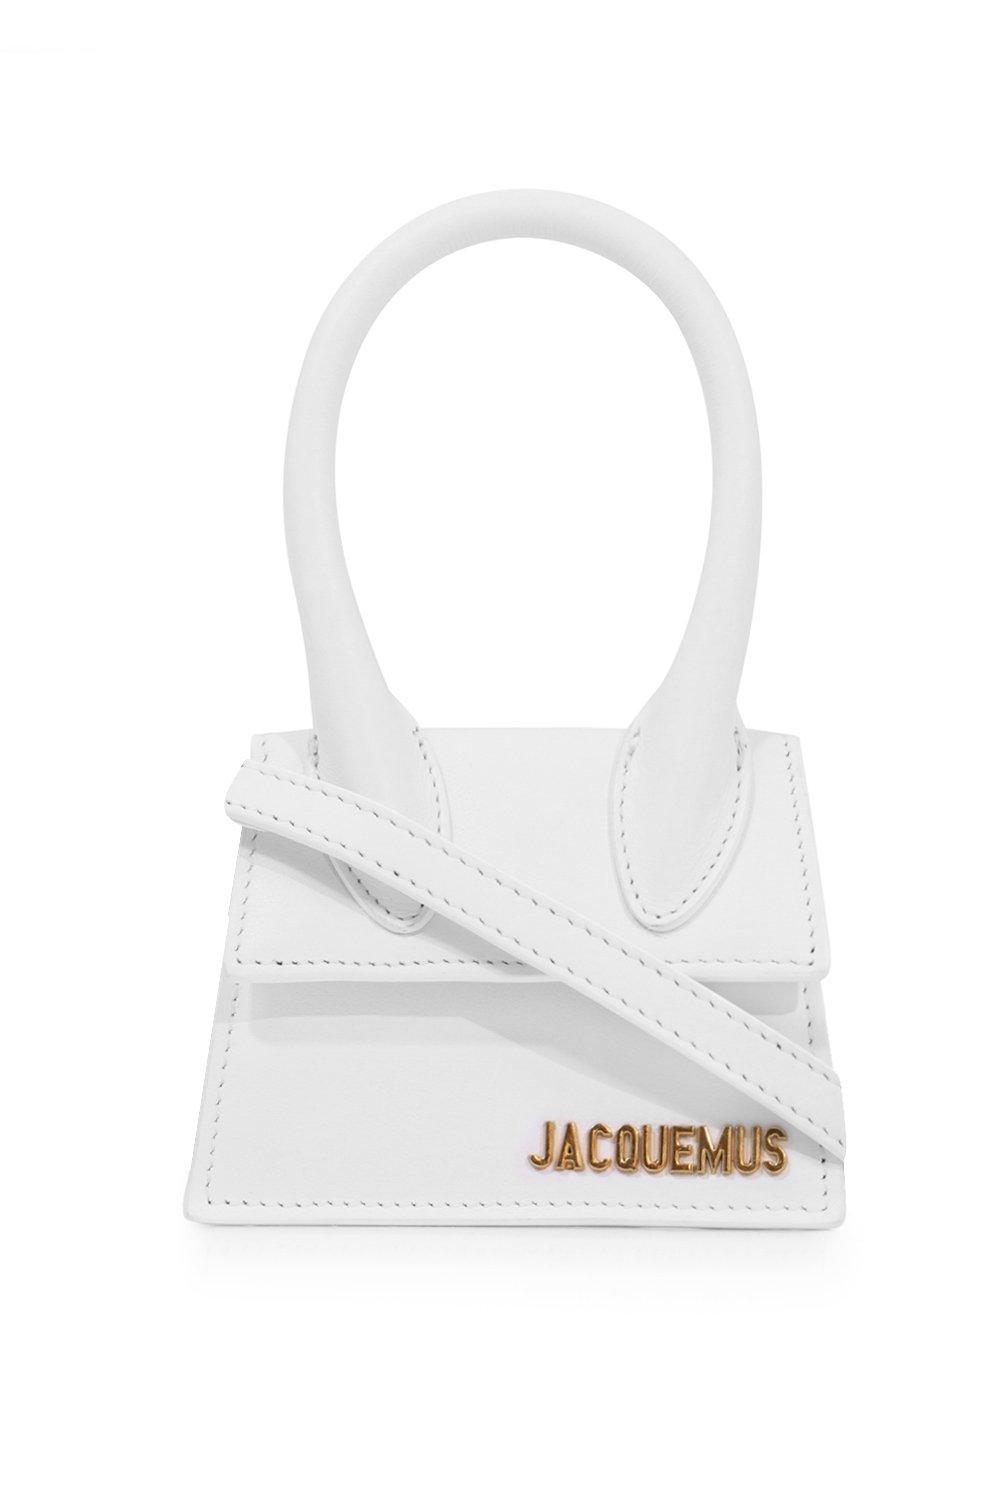 Jacquemus Leather Le Chiquito Bag White - Lyst